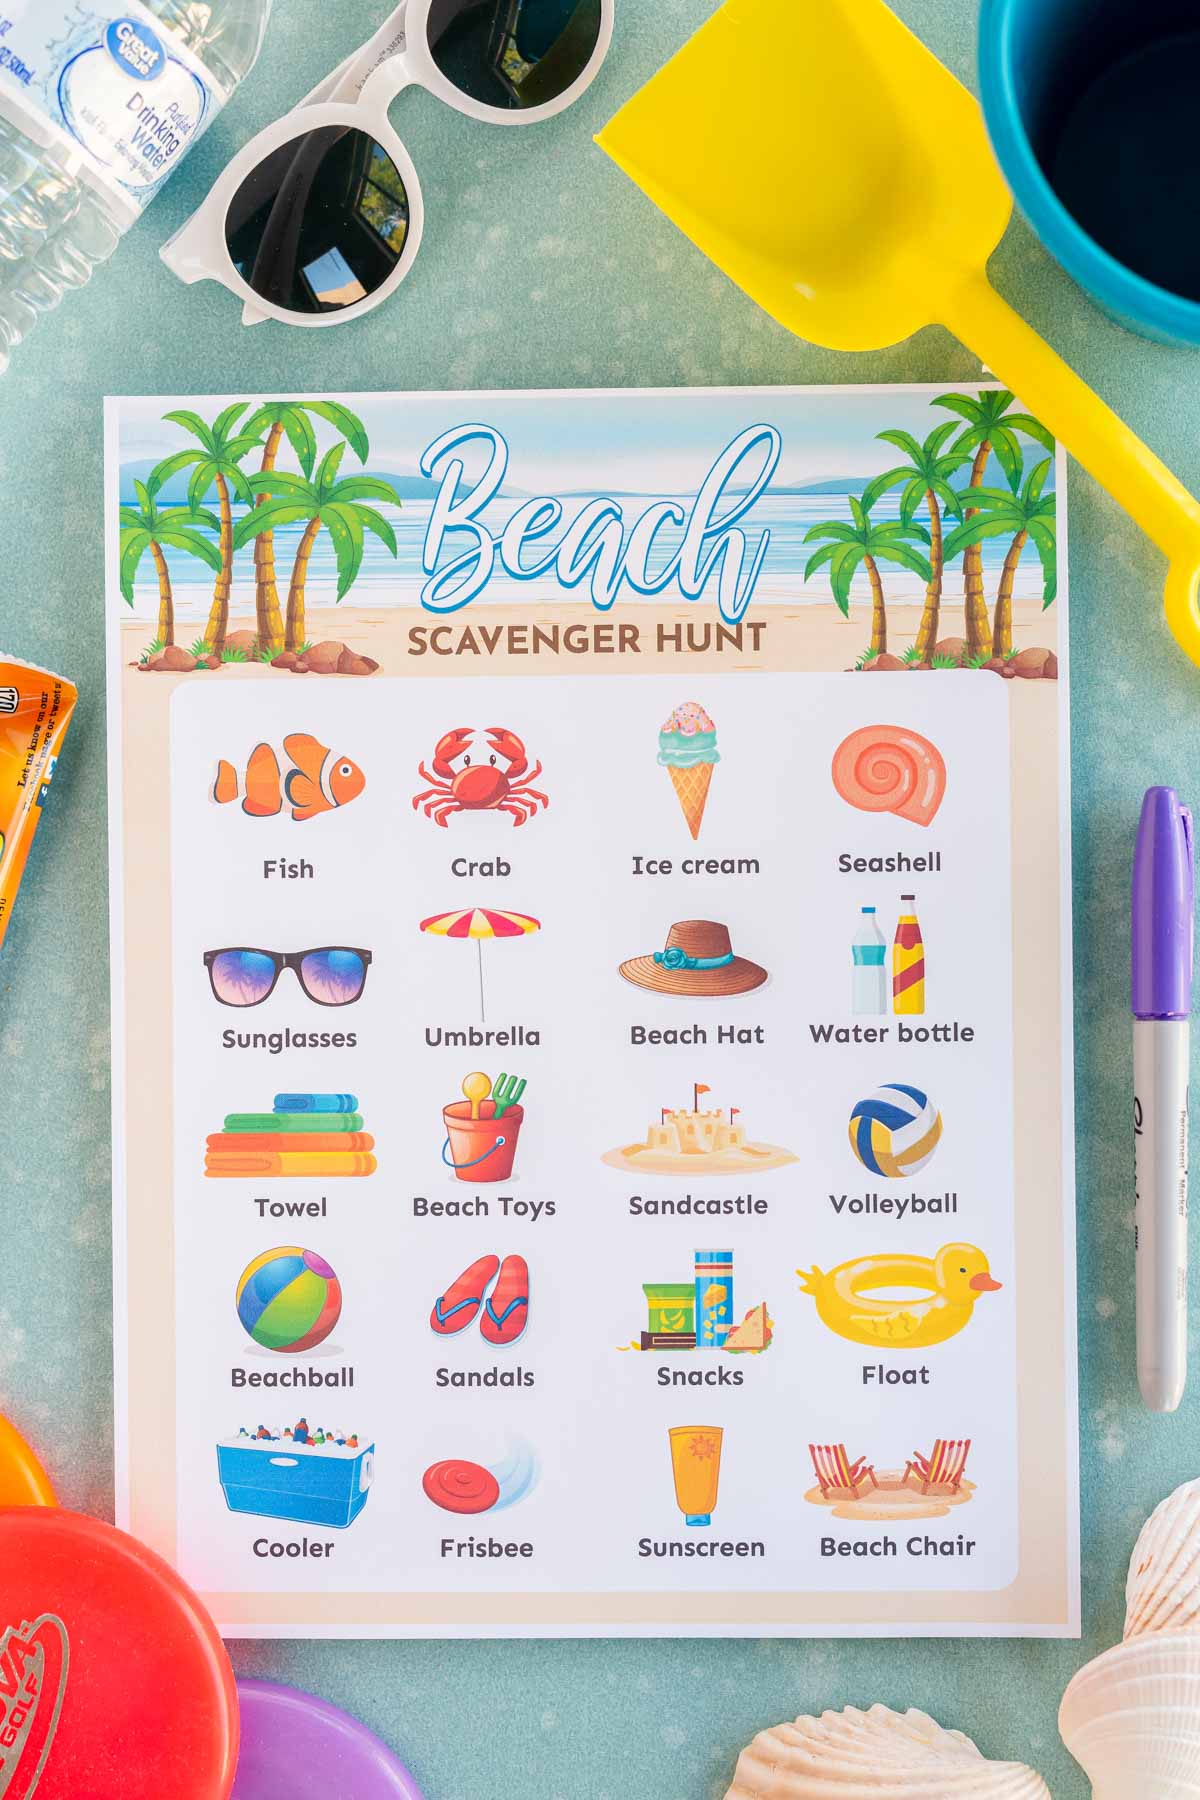 Printed out beach scavenger hunt